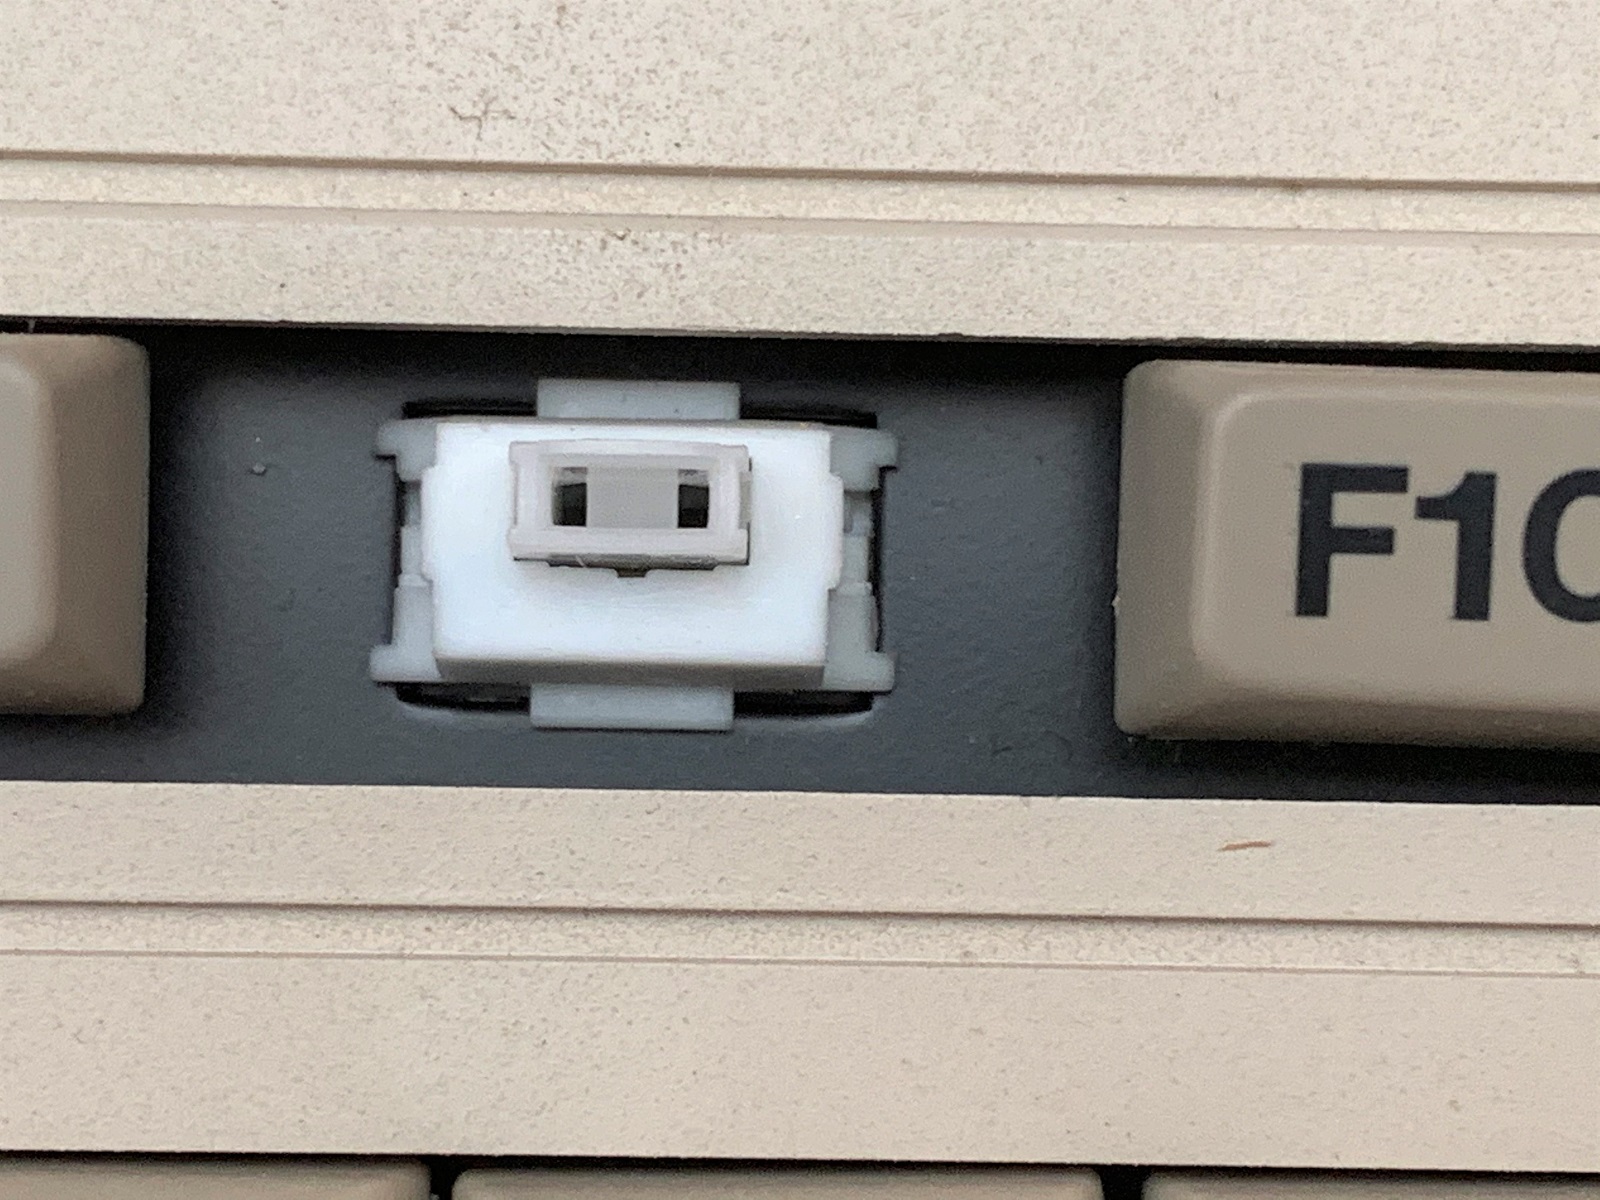 Function key switches